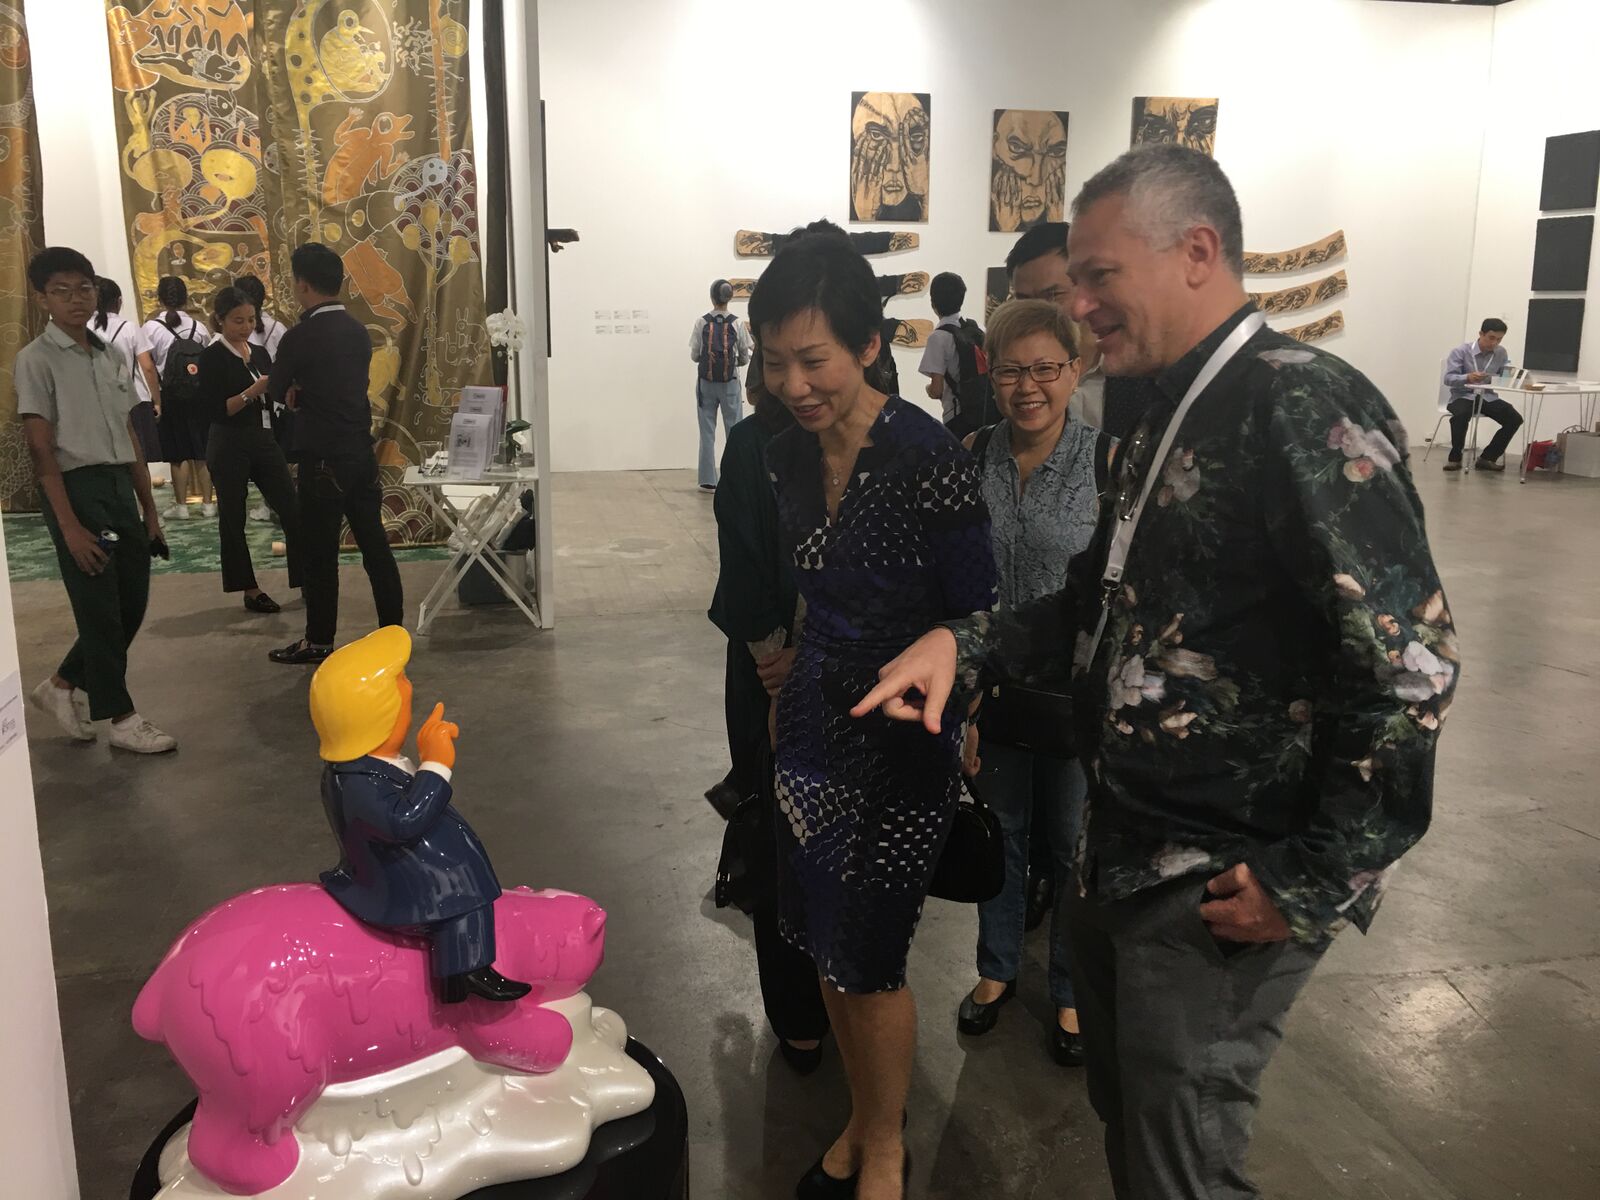 Fake The Climate with artist Arnaud Nazare-Aga Pop Art Trump sculpture on bear Dark Pink Exhibition with people